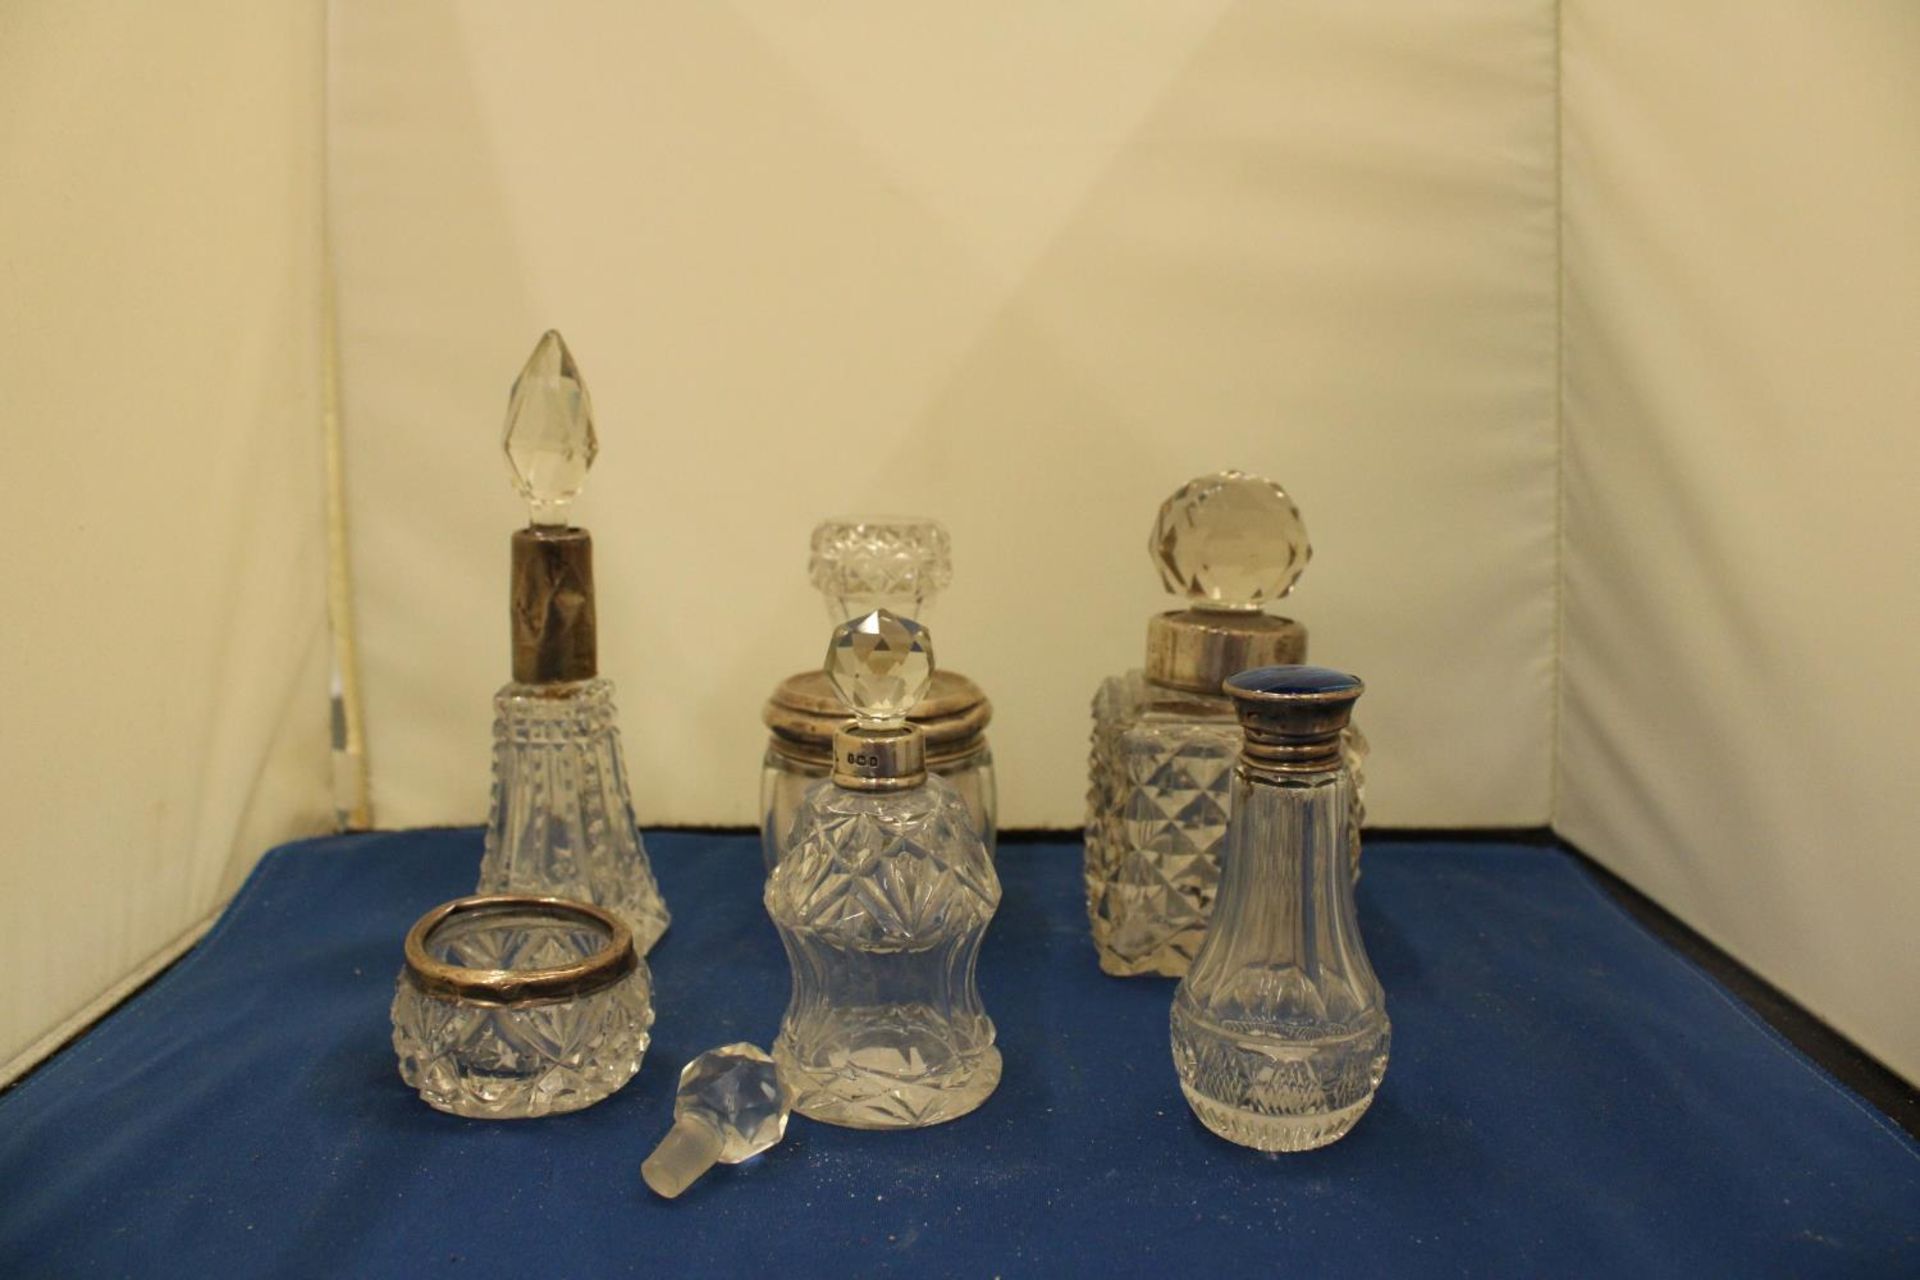 SIX PIECES OF GLASSWARE WITH MARKED SILVER COLLARS, LIDS, RIMS TO INCLUDE A BLUE ENAMEL - Image 2 of 5